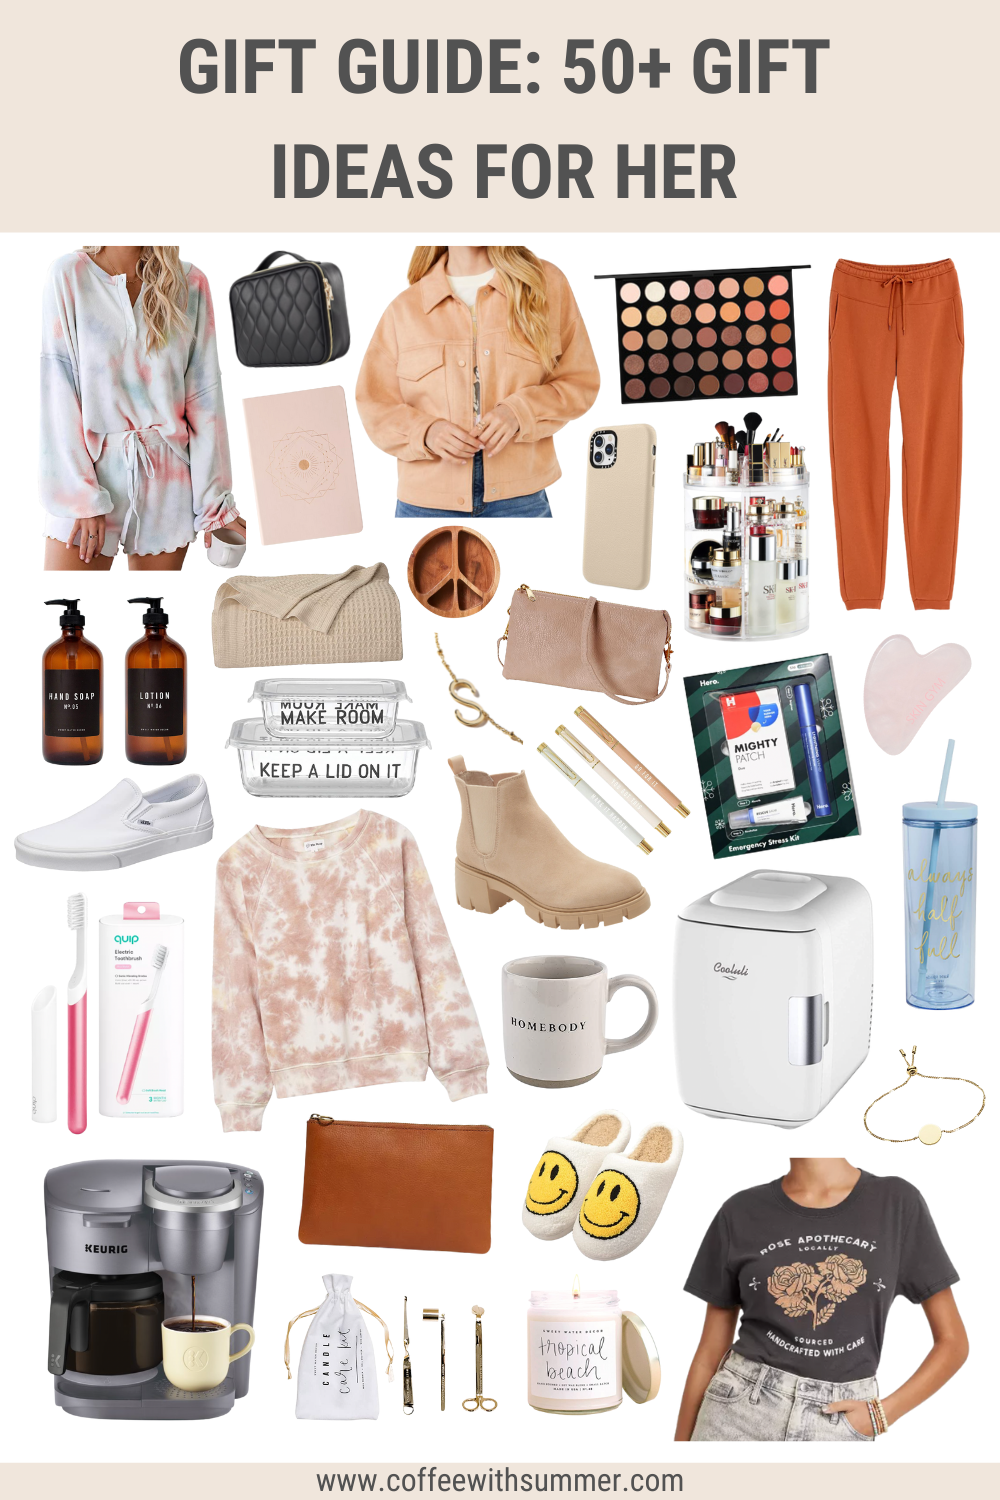 Gift Guide: 50+ Gift Ideas For Her